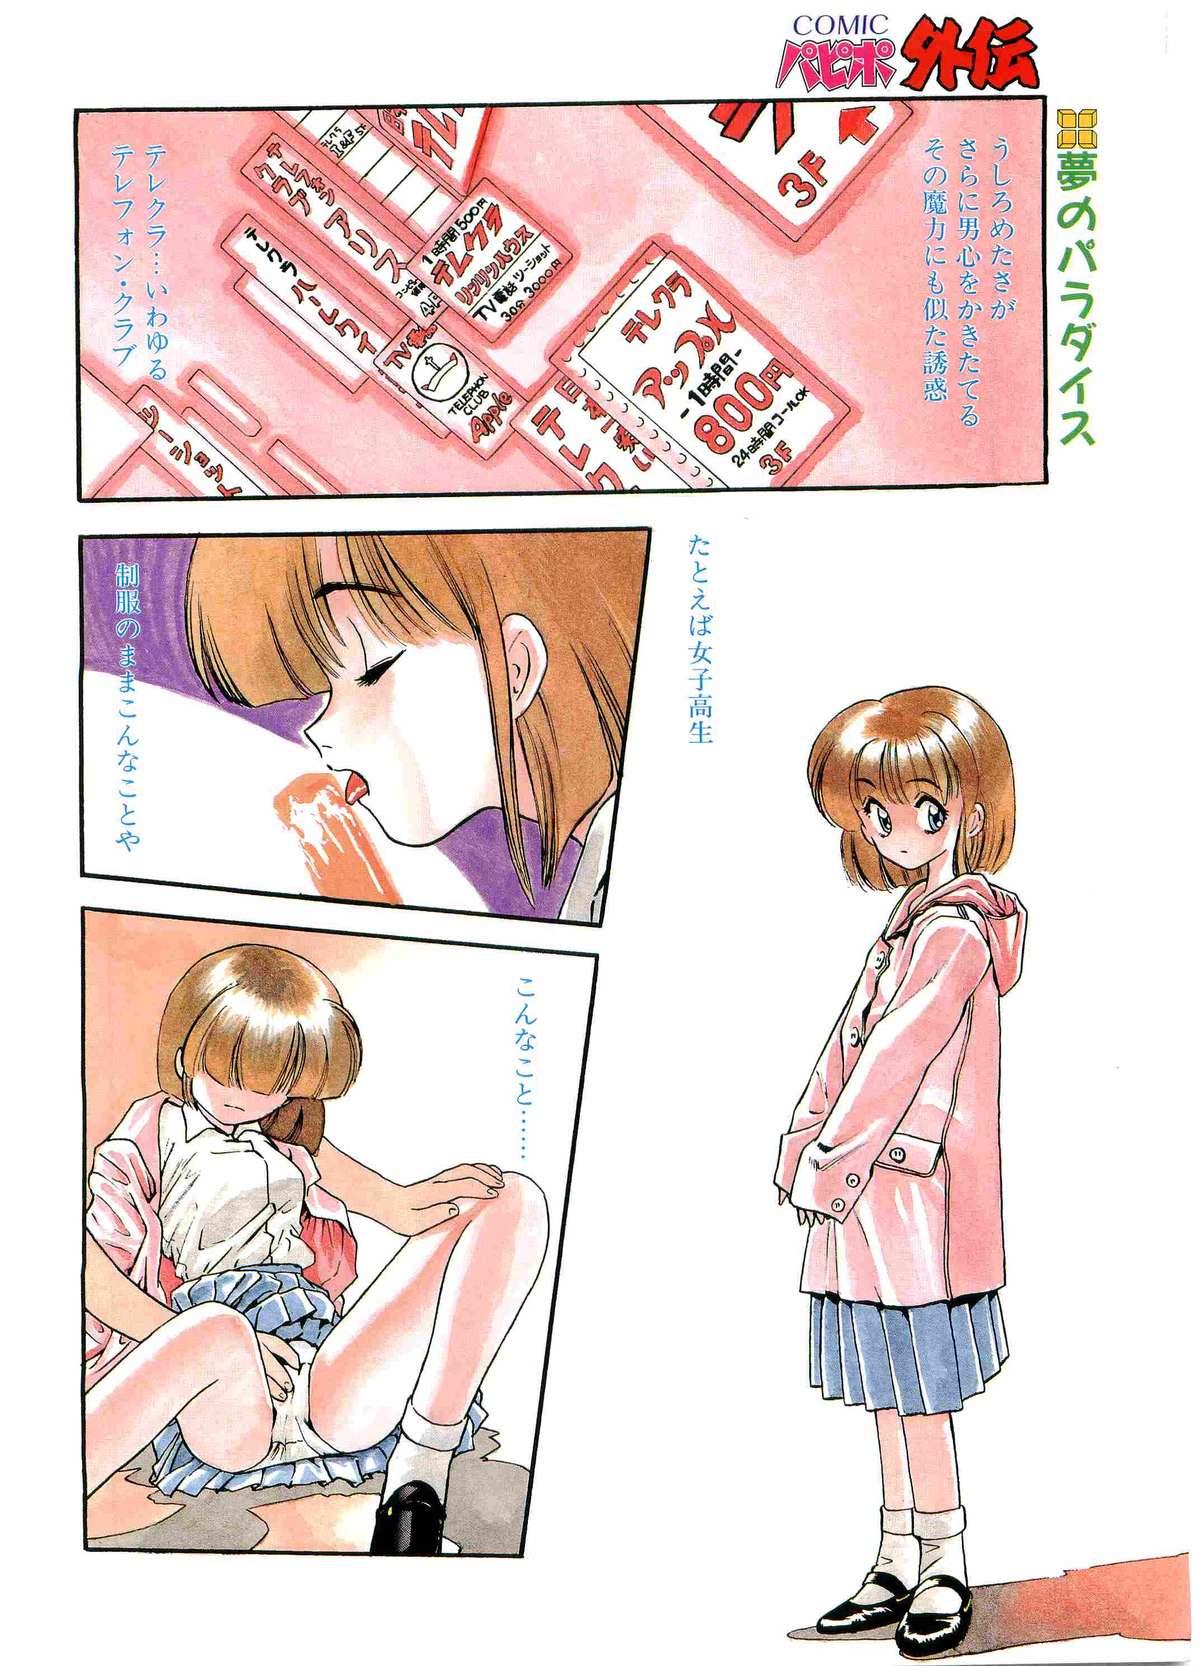 Novia COMIC Papipo Gaiden 1995-03 Submission - Page 4